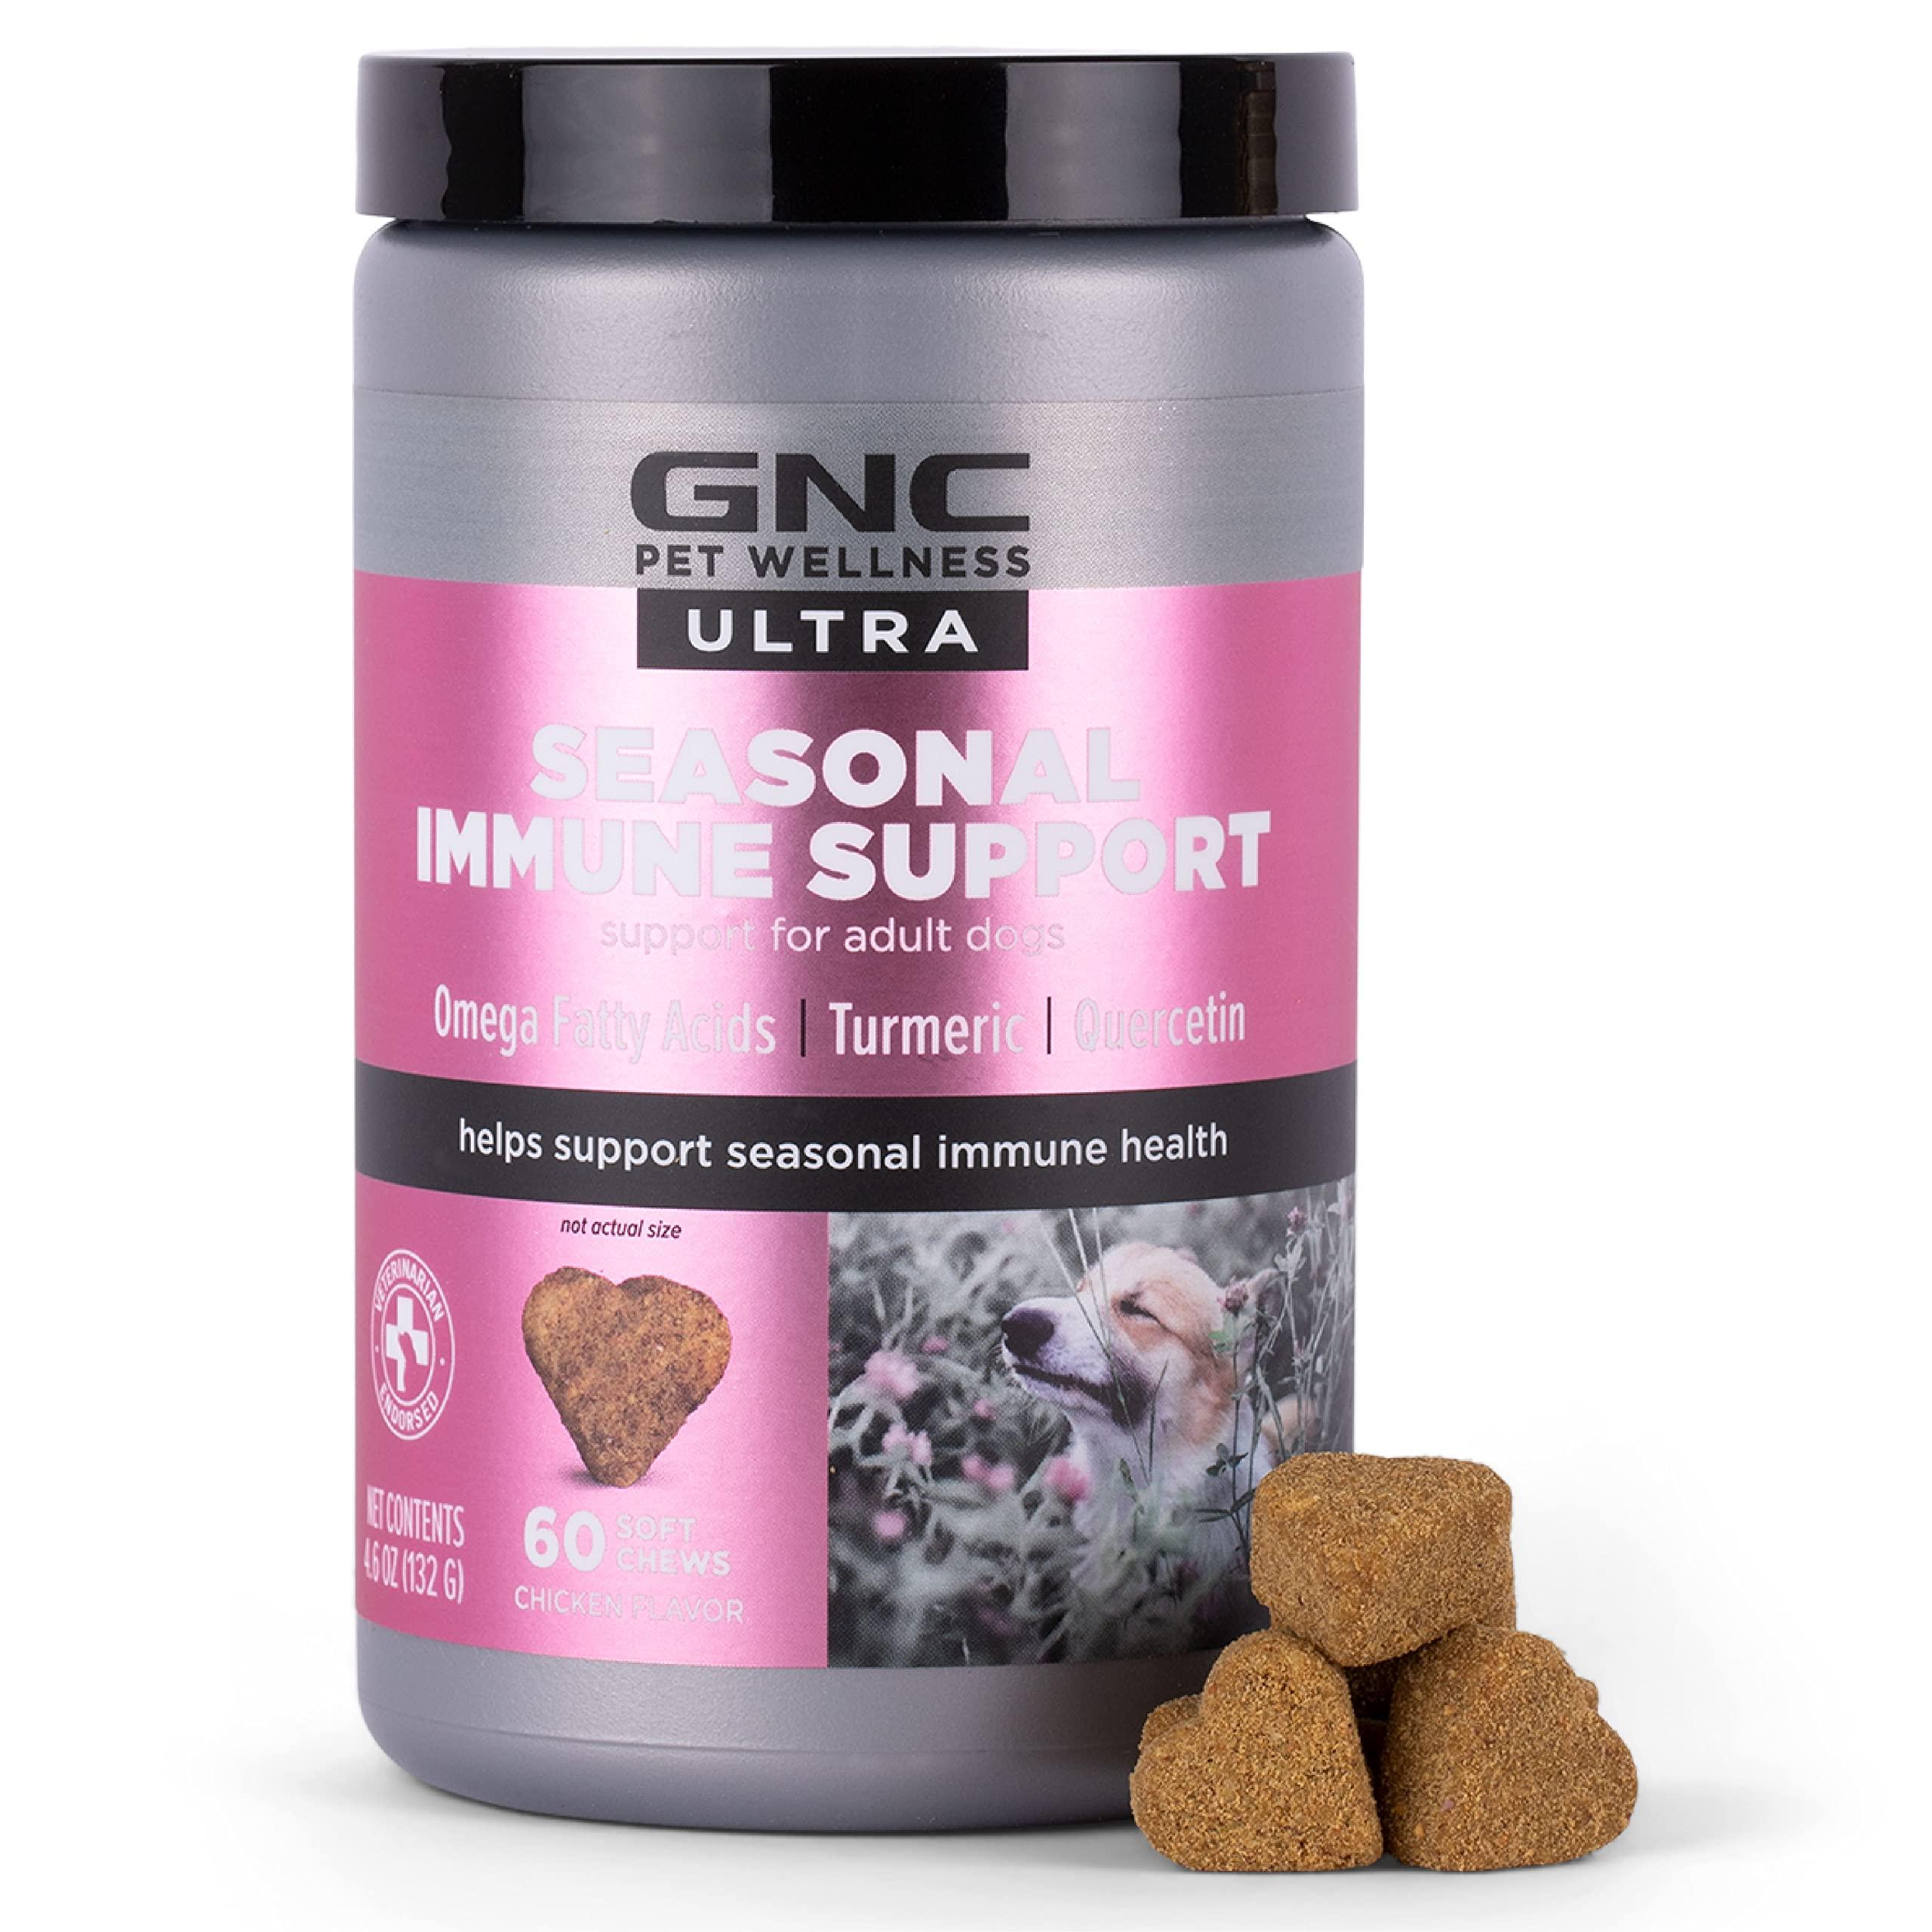 GNC Pets Ultra Seasonal Immune Support, All Dogs, Chicken Flavor.(2.2g) Soft Chews | Immune Booster for Dogs in Chicken Flavored Chews 60 Count FF13838